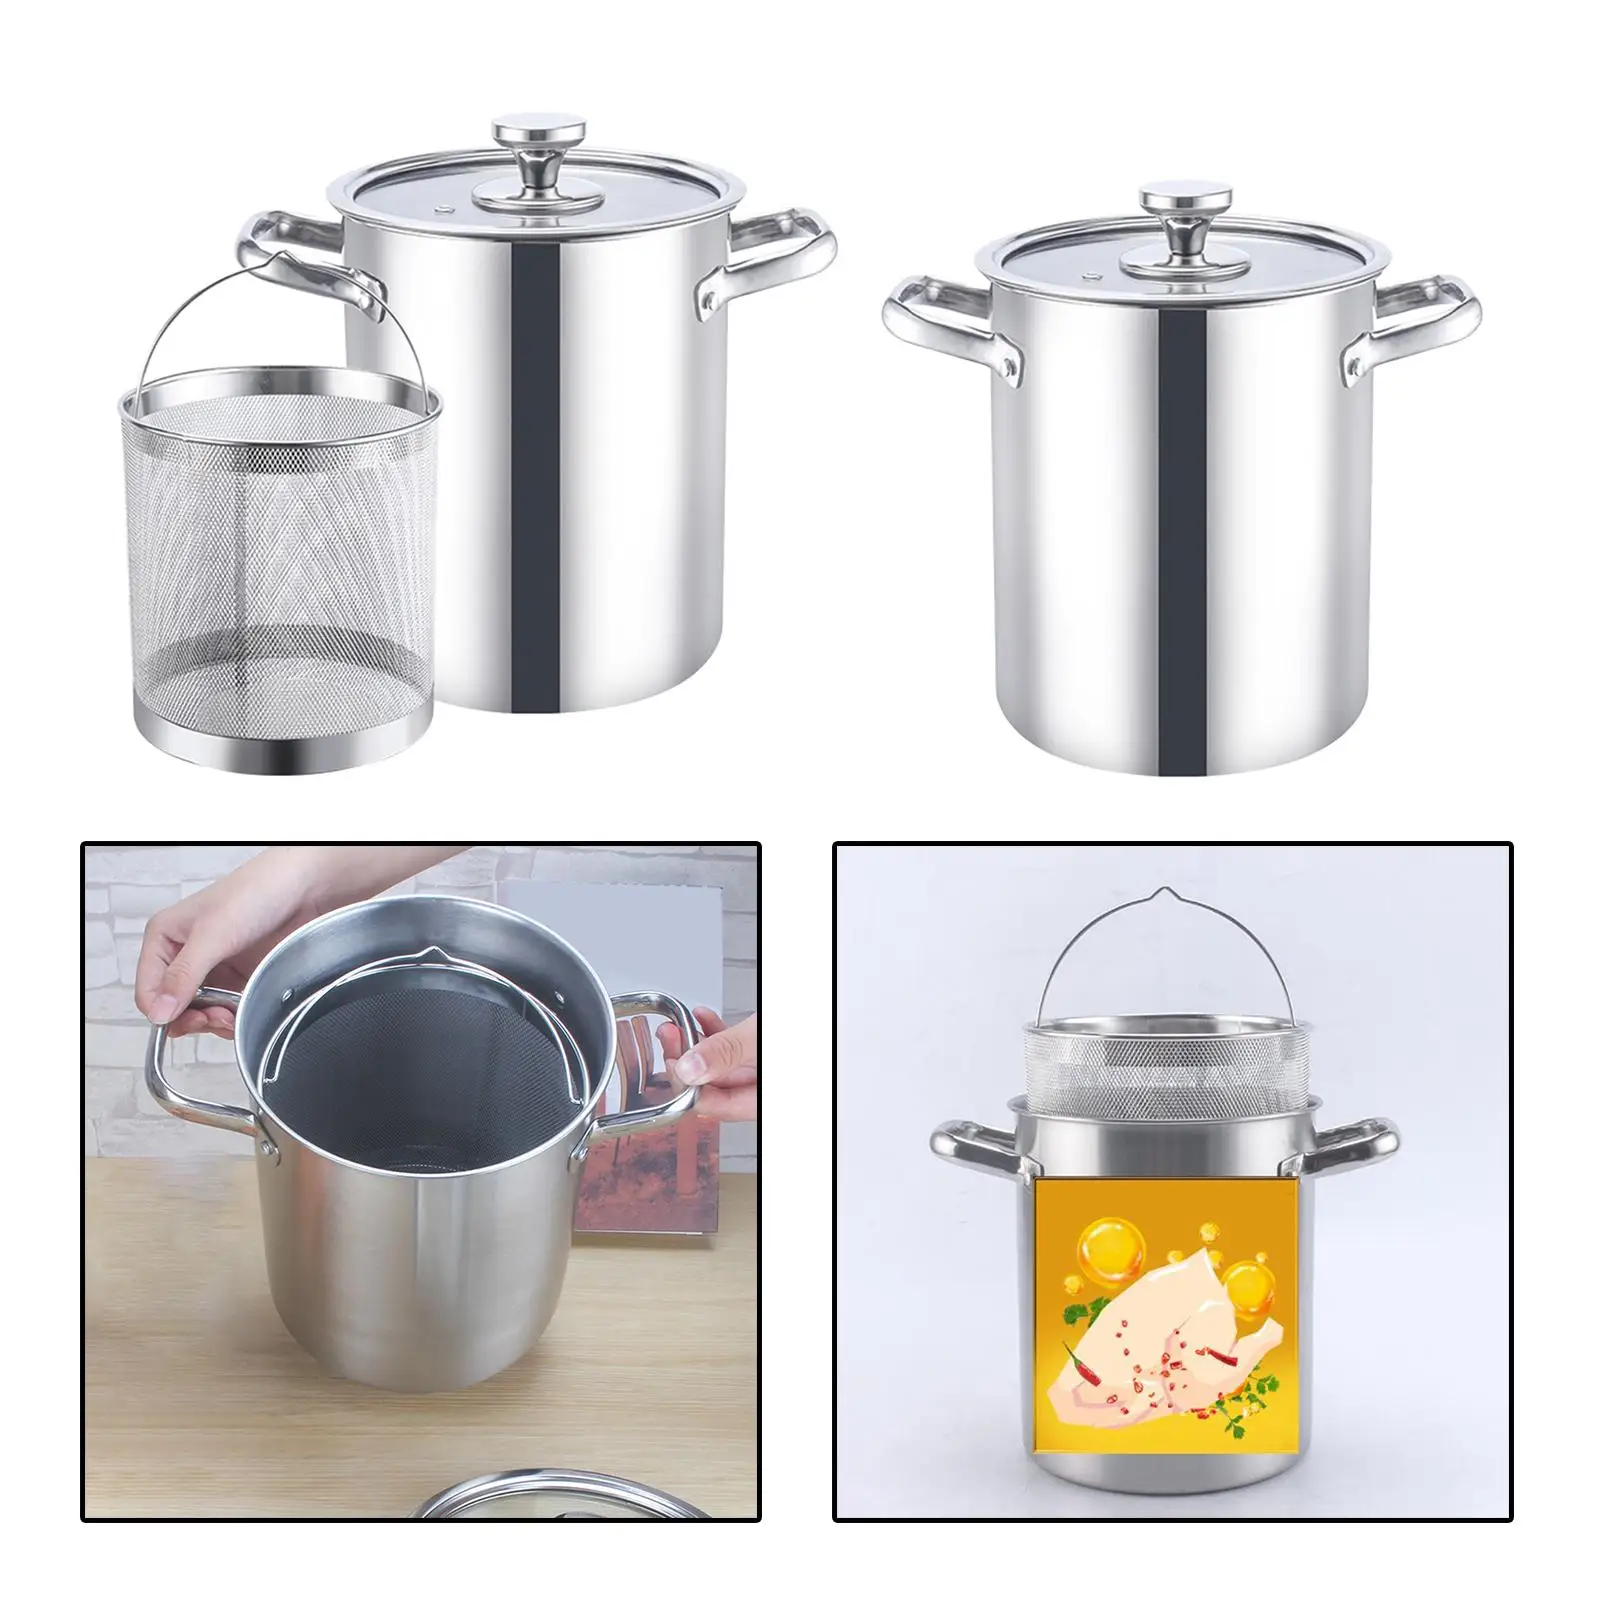 Stockpot Heavy Duty for Steaming, Frying and Boiling Large Capacity with Lid